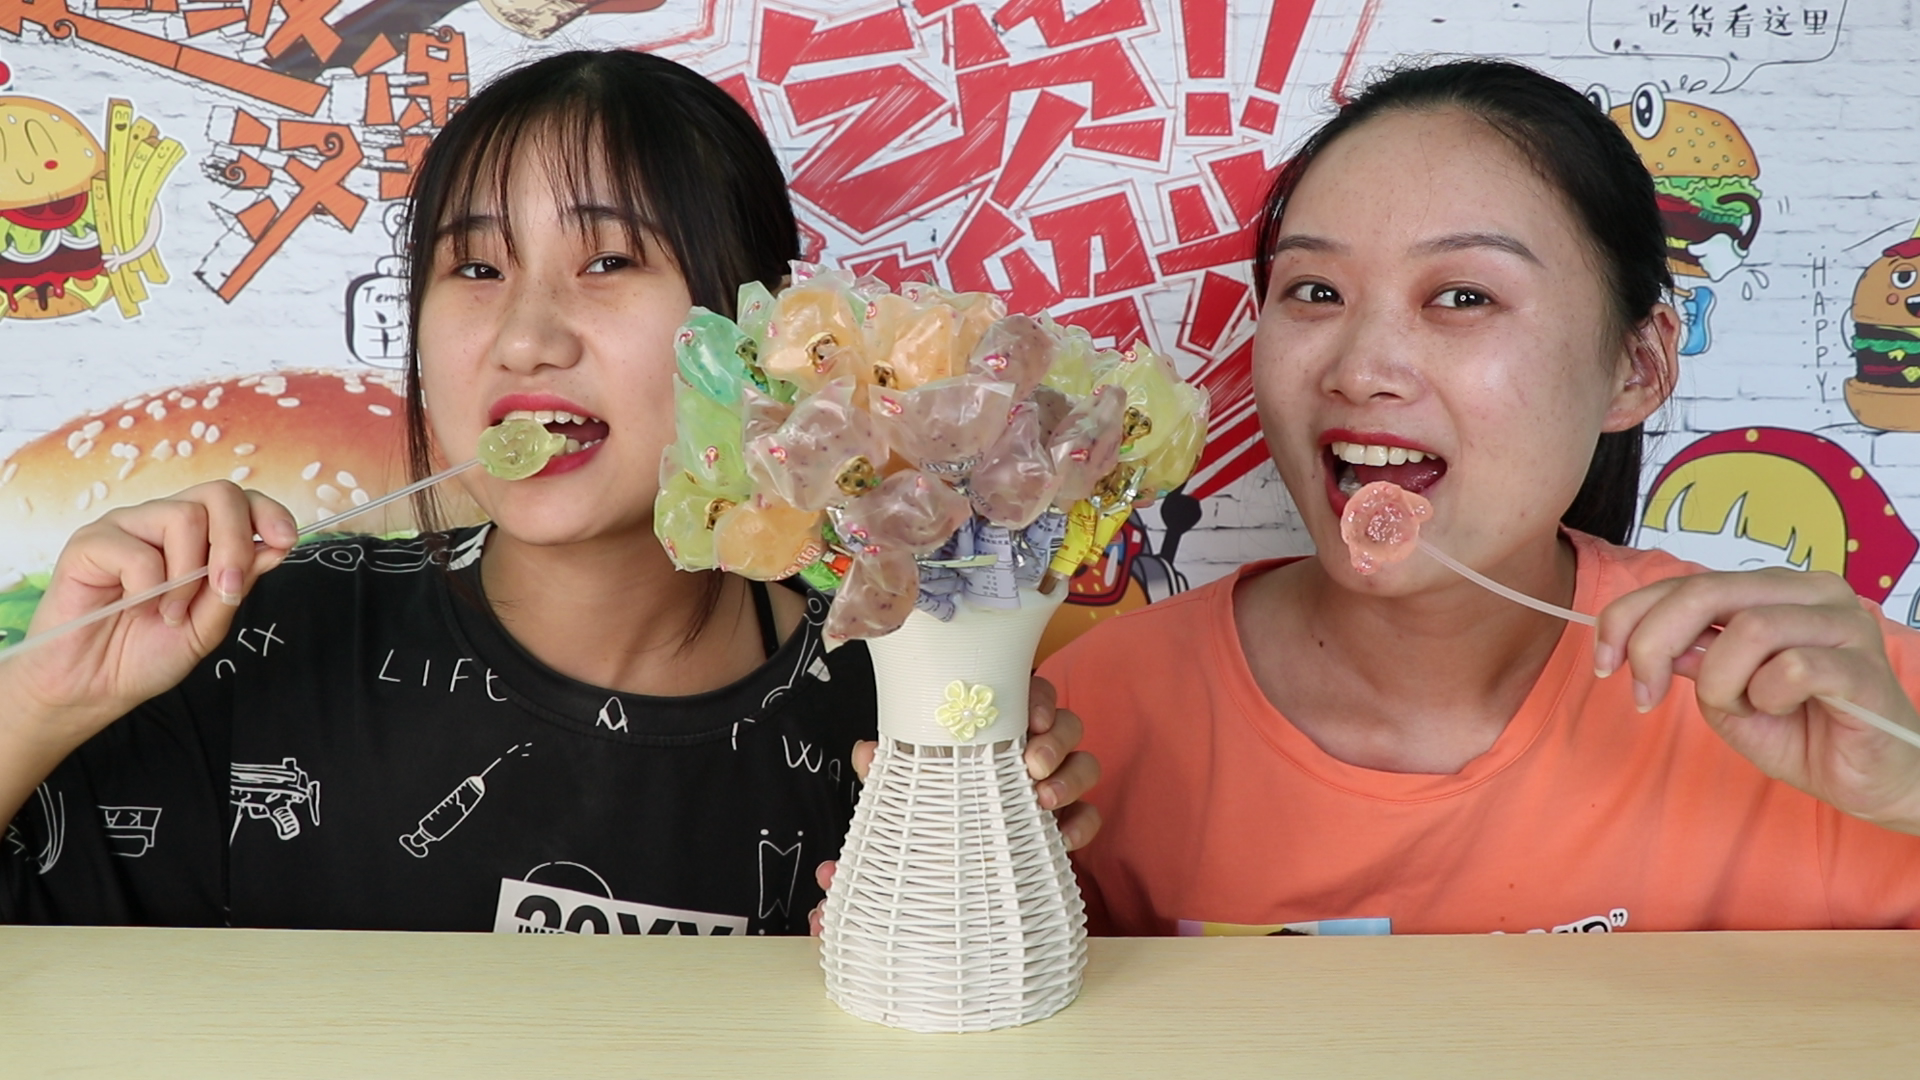 They ate "Single Dog Lollipop", which was colorful and transparent with sweet and fruity flavor.